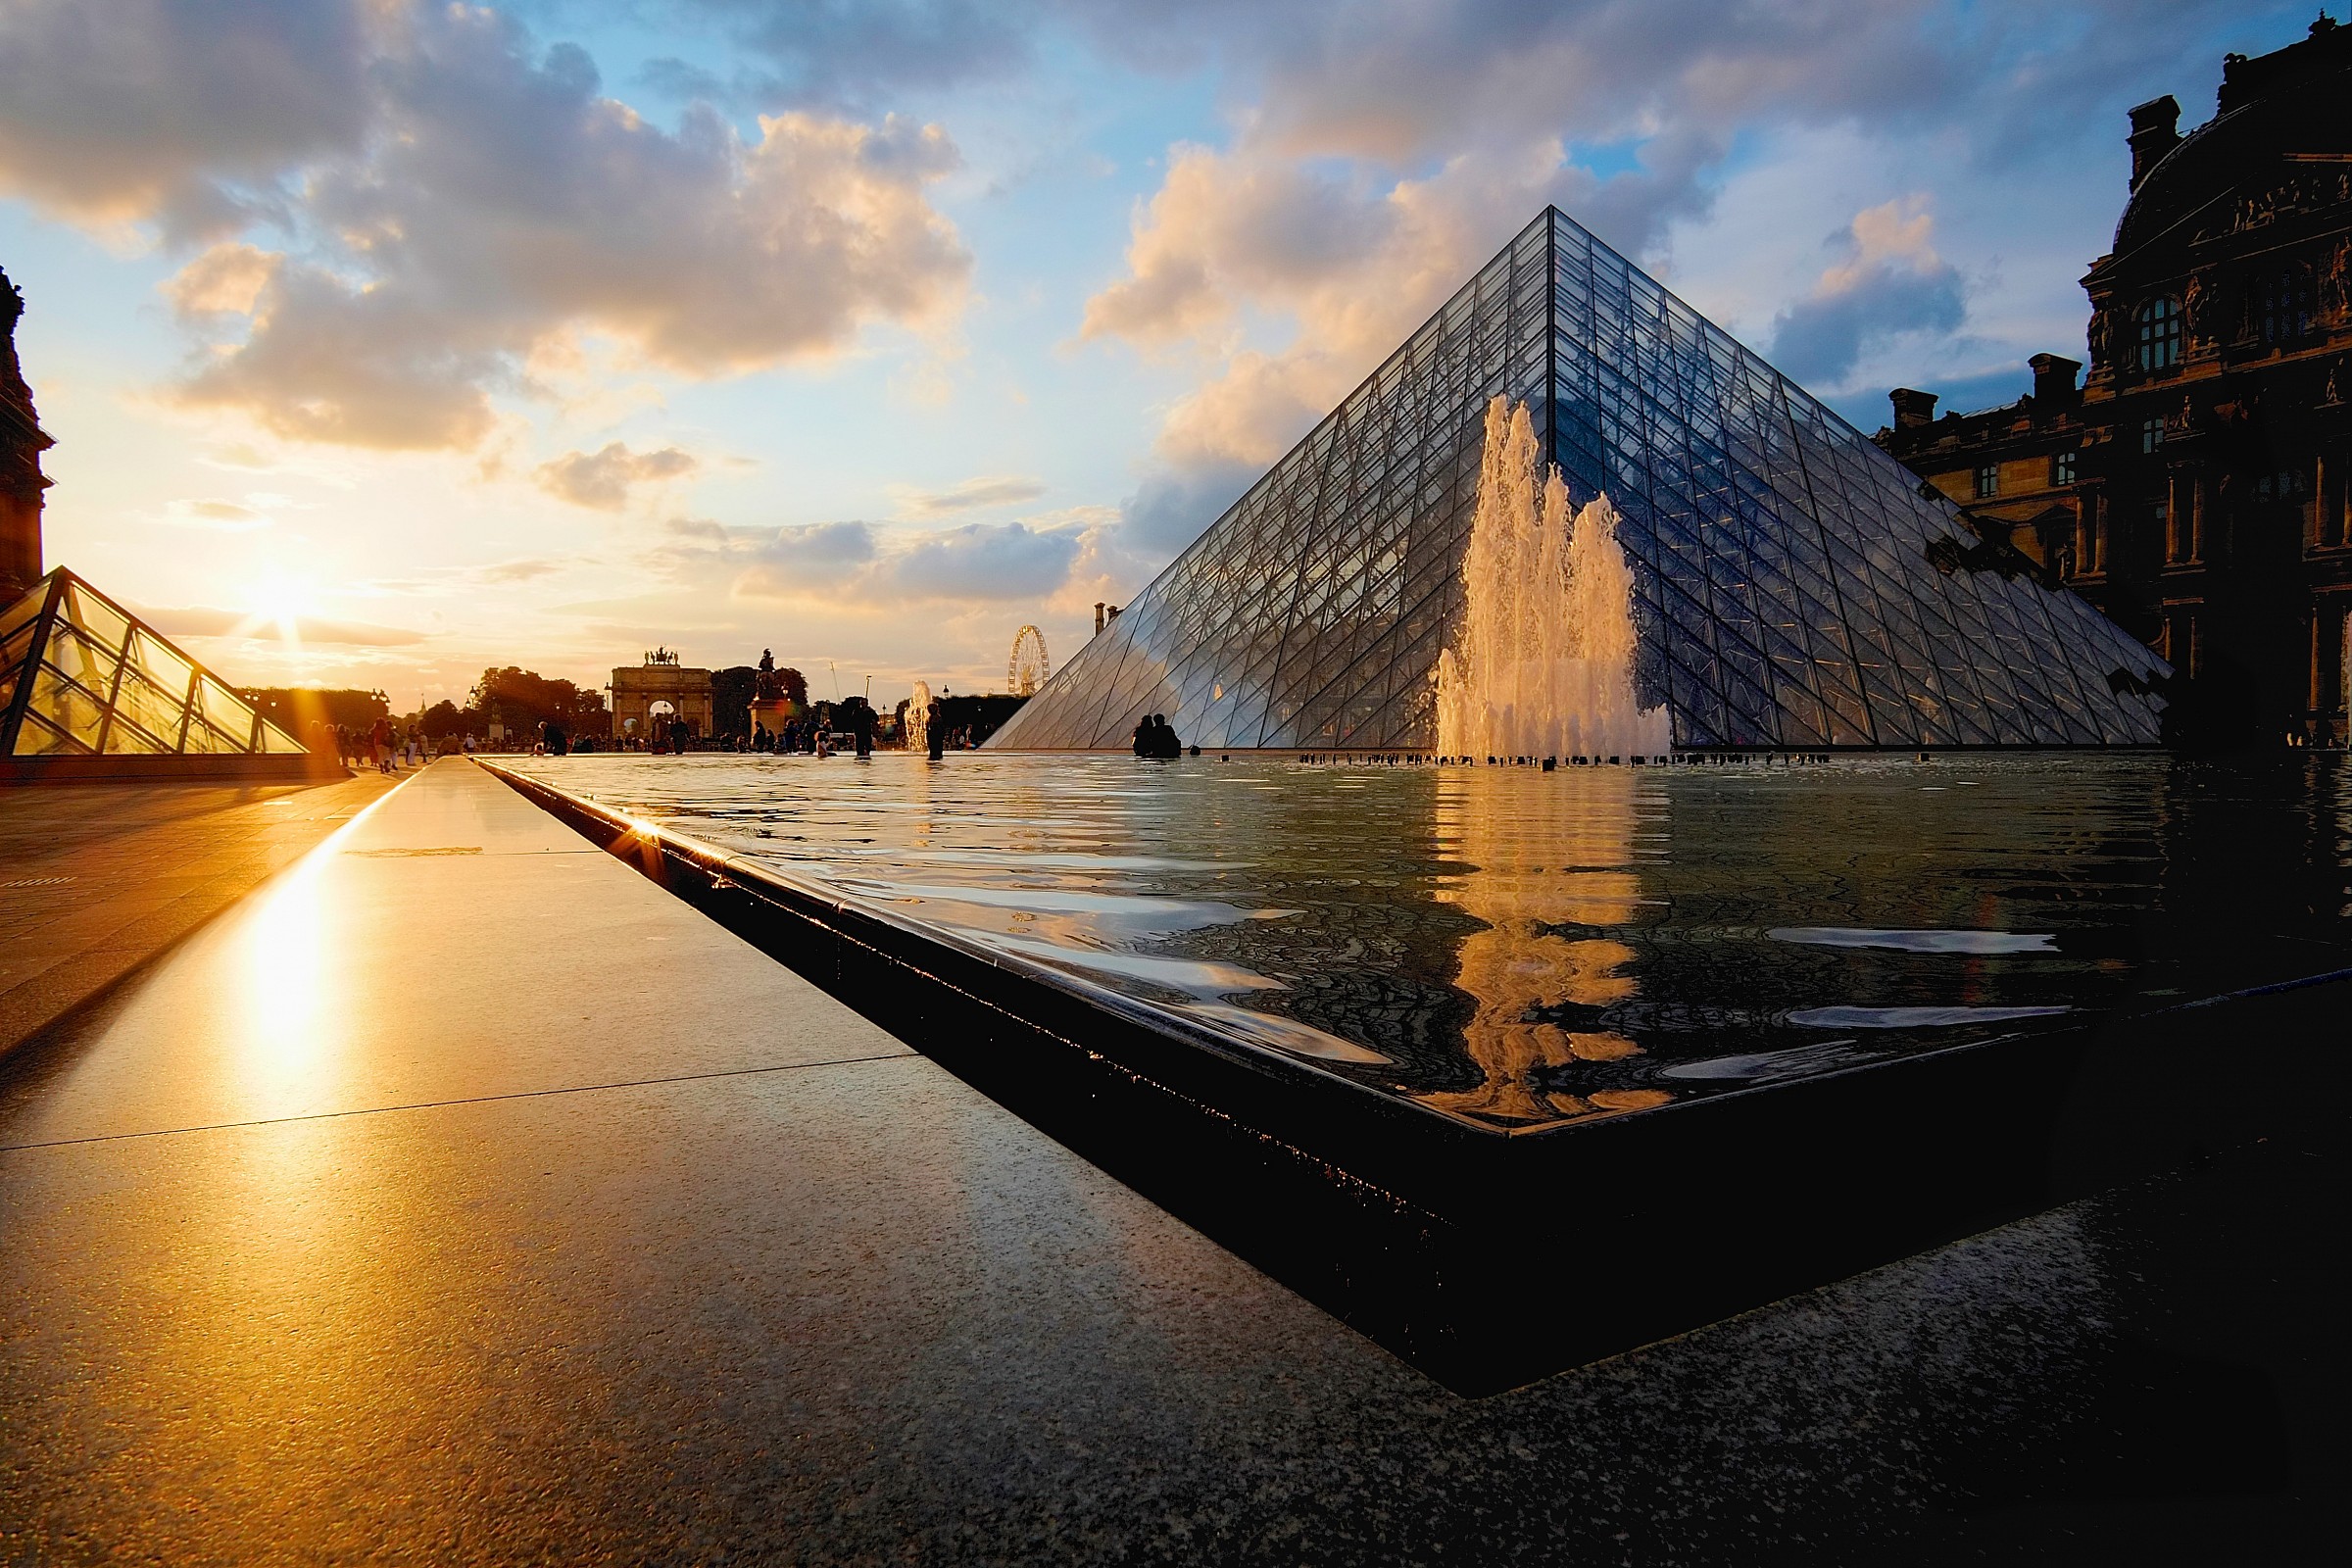 Sunset at the Louvre...